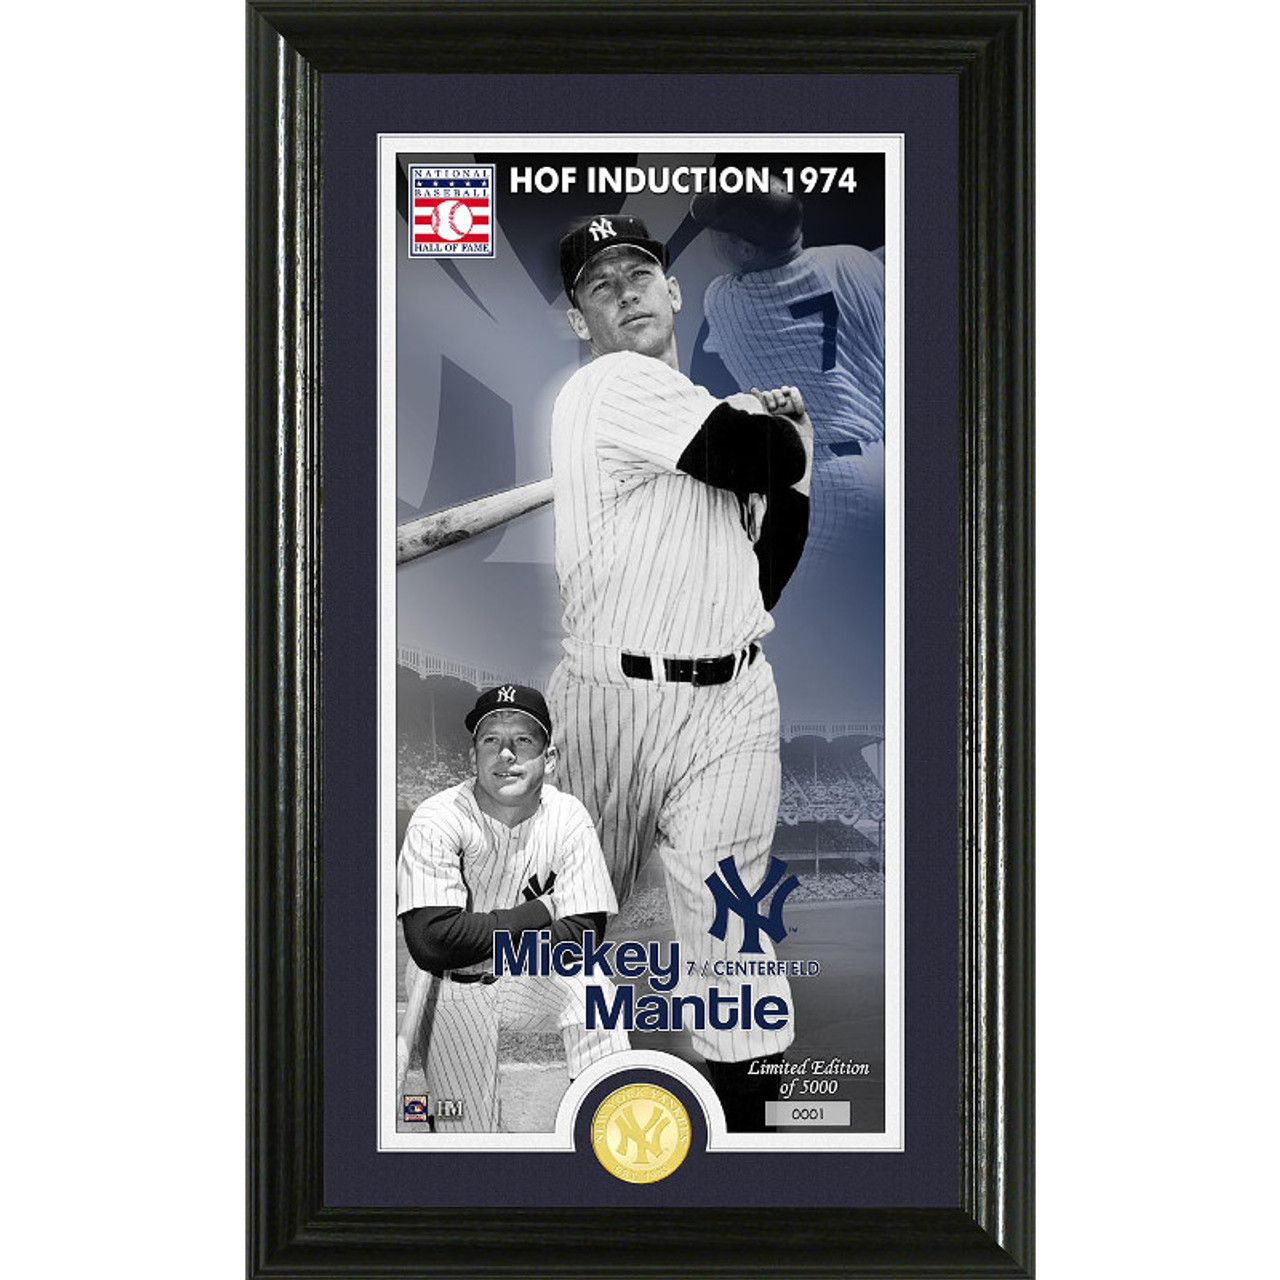 The Highland Mint | New York Yankees Silver Coin Photo Mint